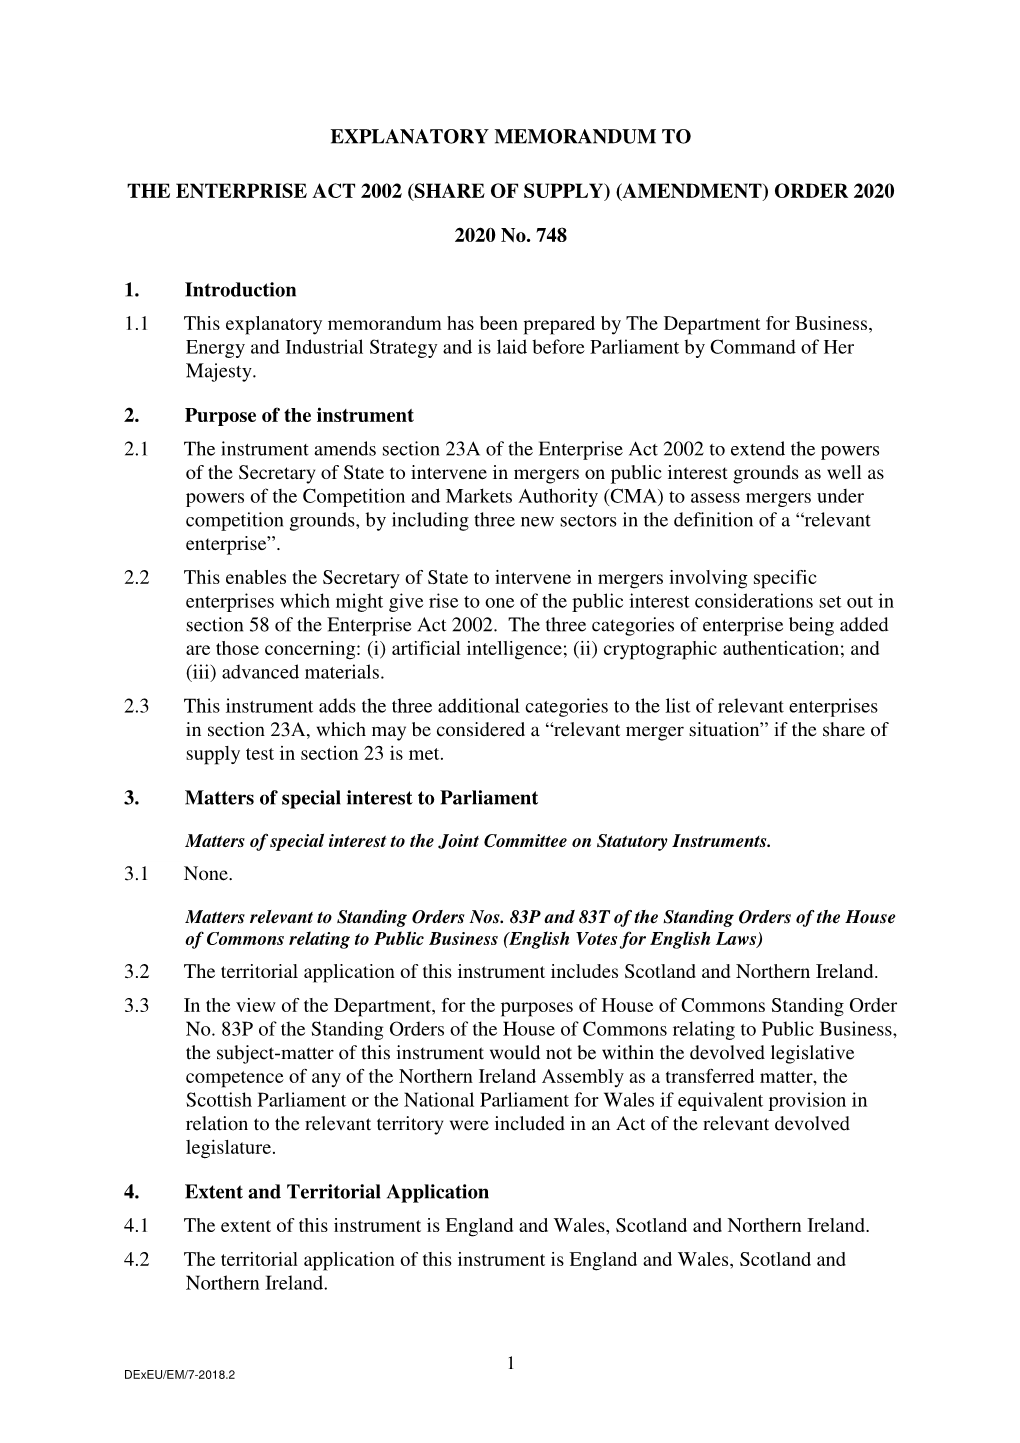 The Enterprise Act 2002 (Share of Supply) (Amendment) Order 2020